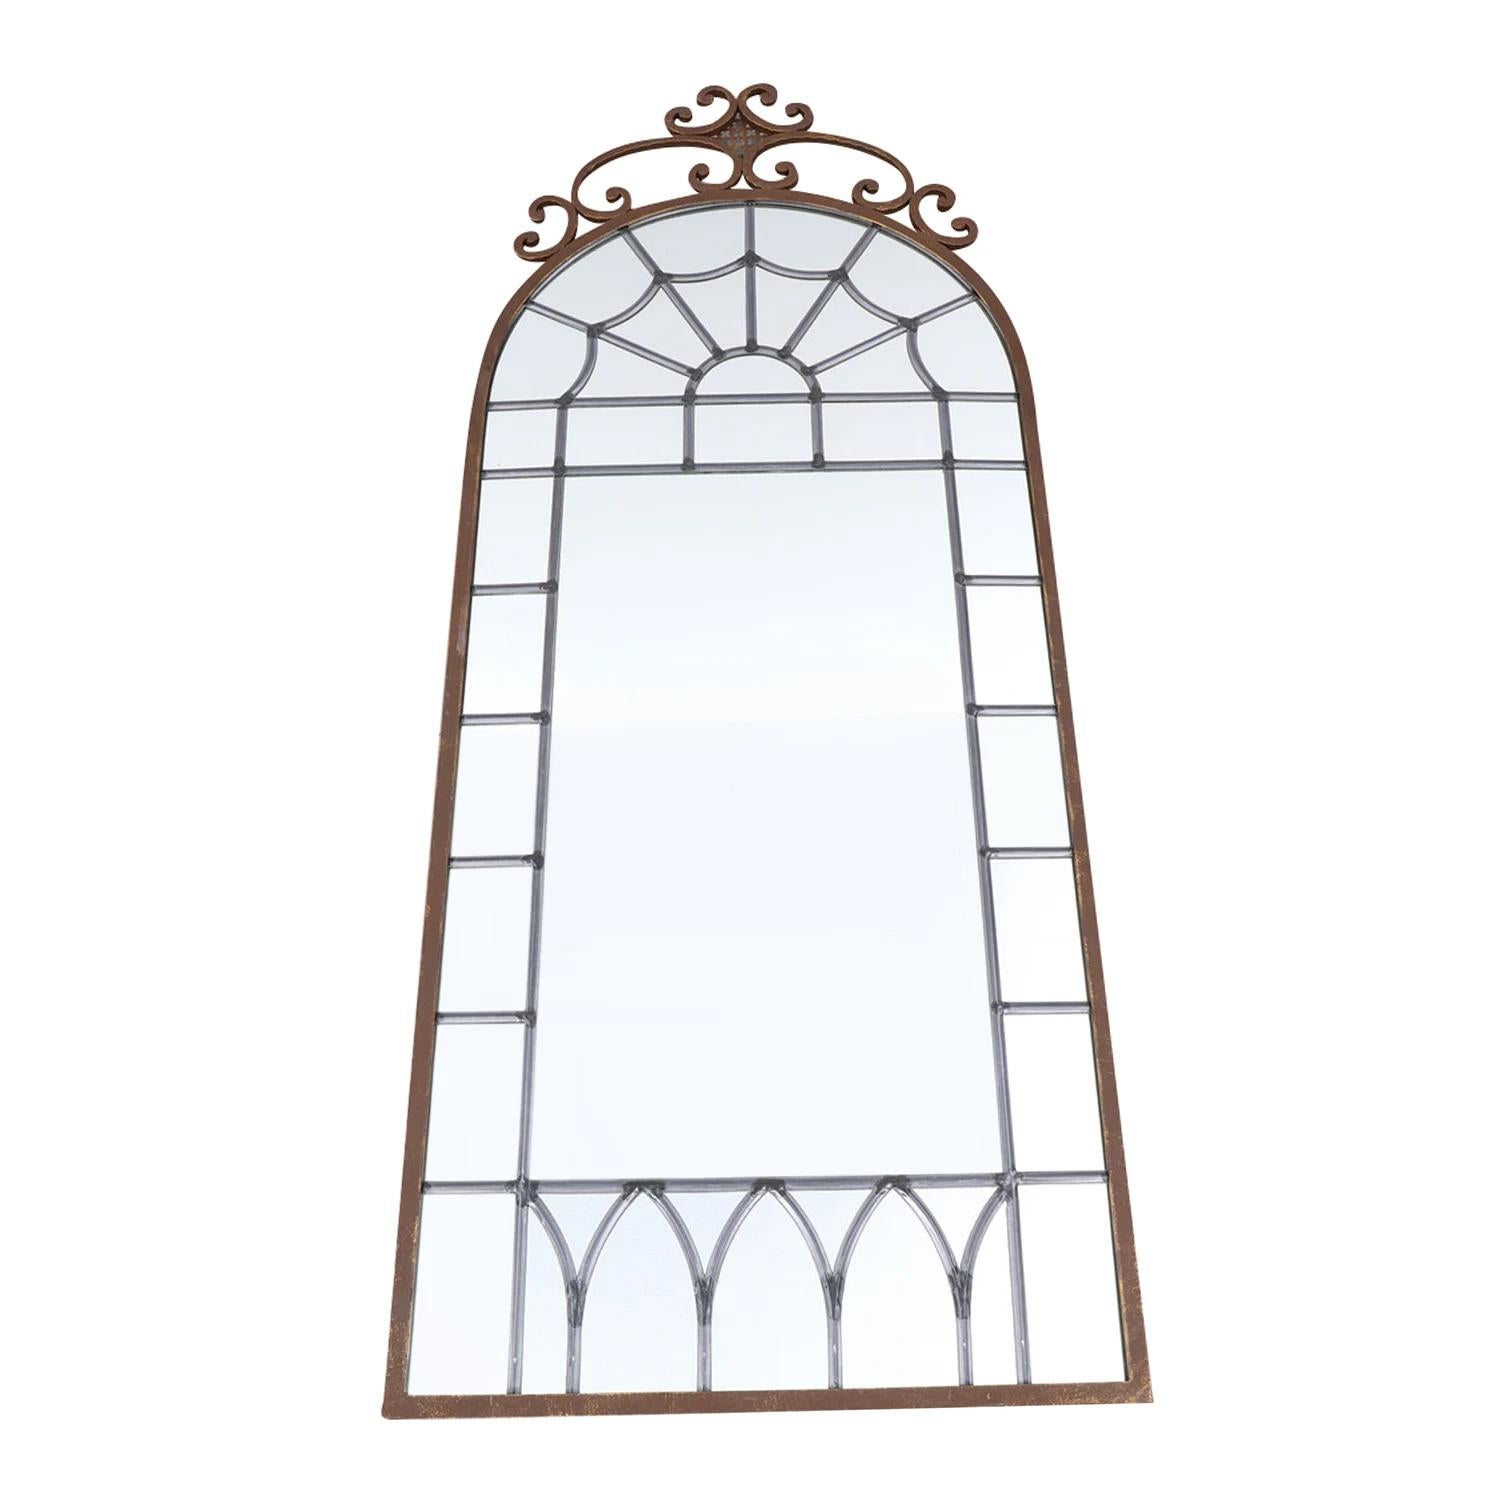 An antique French pair of wall mirrors with an arched top, made of hand crafted metal in good condition. The large mirror is consisting its original mirrored, leaded glass particularized by detailed flower crafting. The Parisian décor pieces